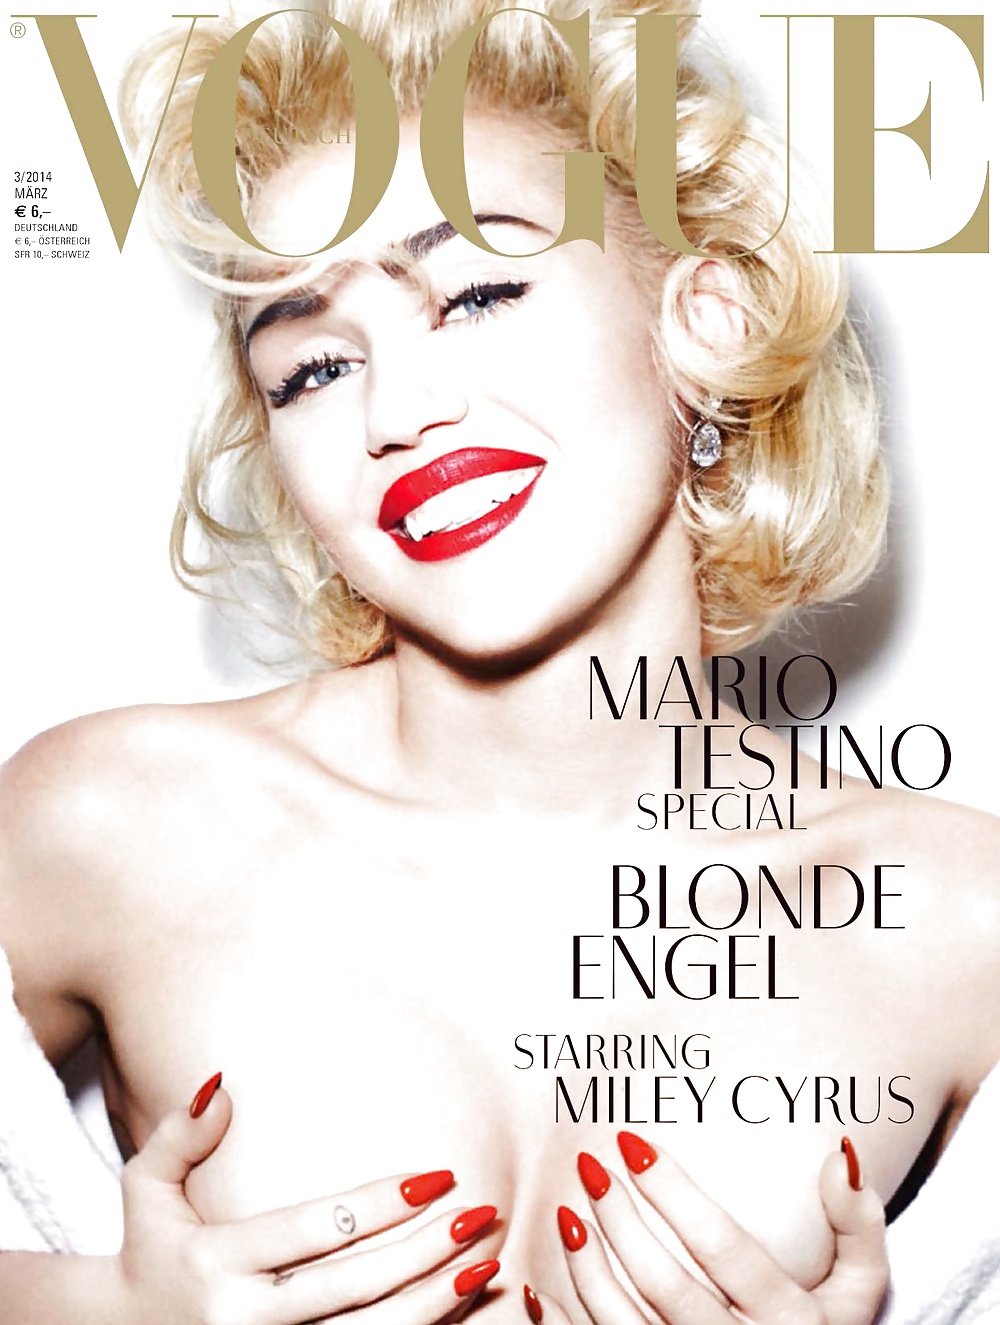 Miley Cyrus (Mode) #27052245